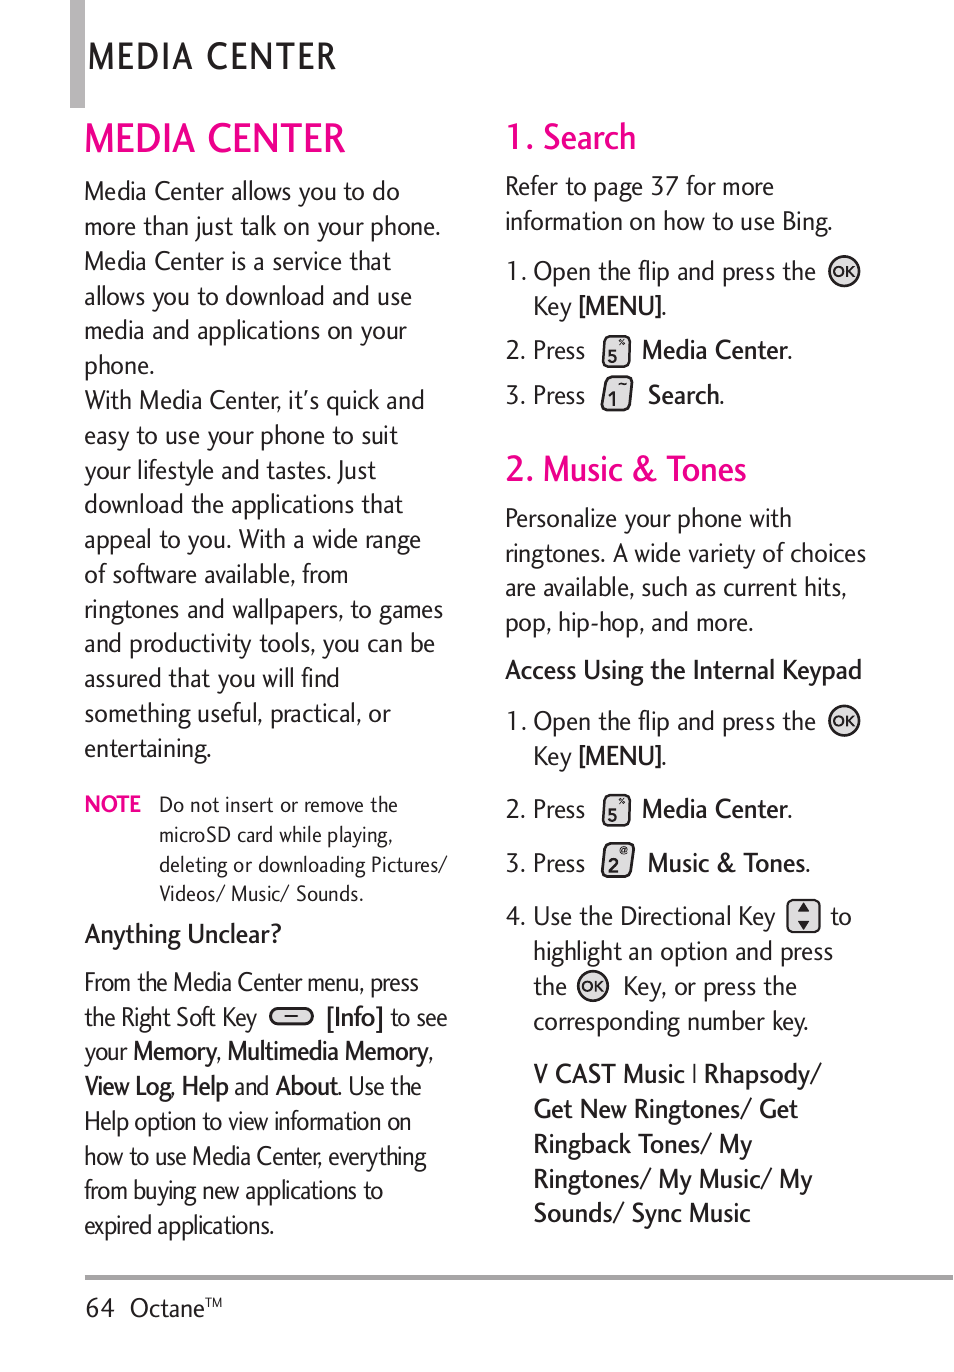 Media center, Search, Music & tones | Search 2. music & tones | LG Octane VN530 User Manual | Page 66 / 345